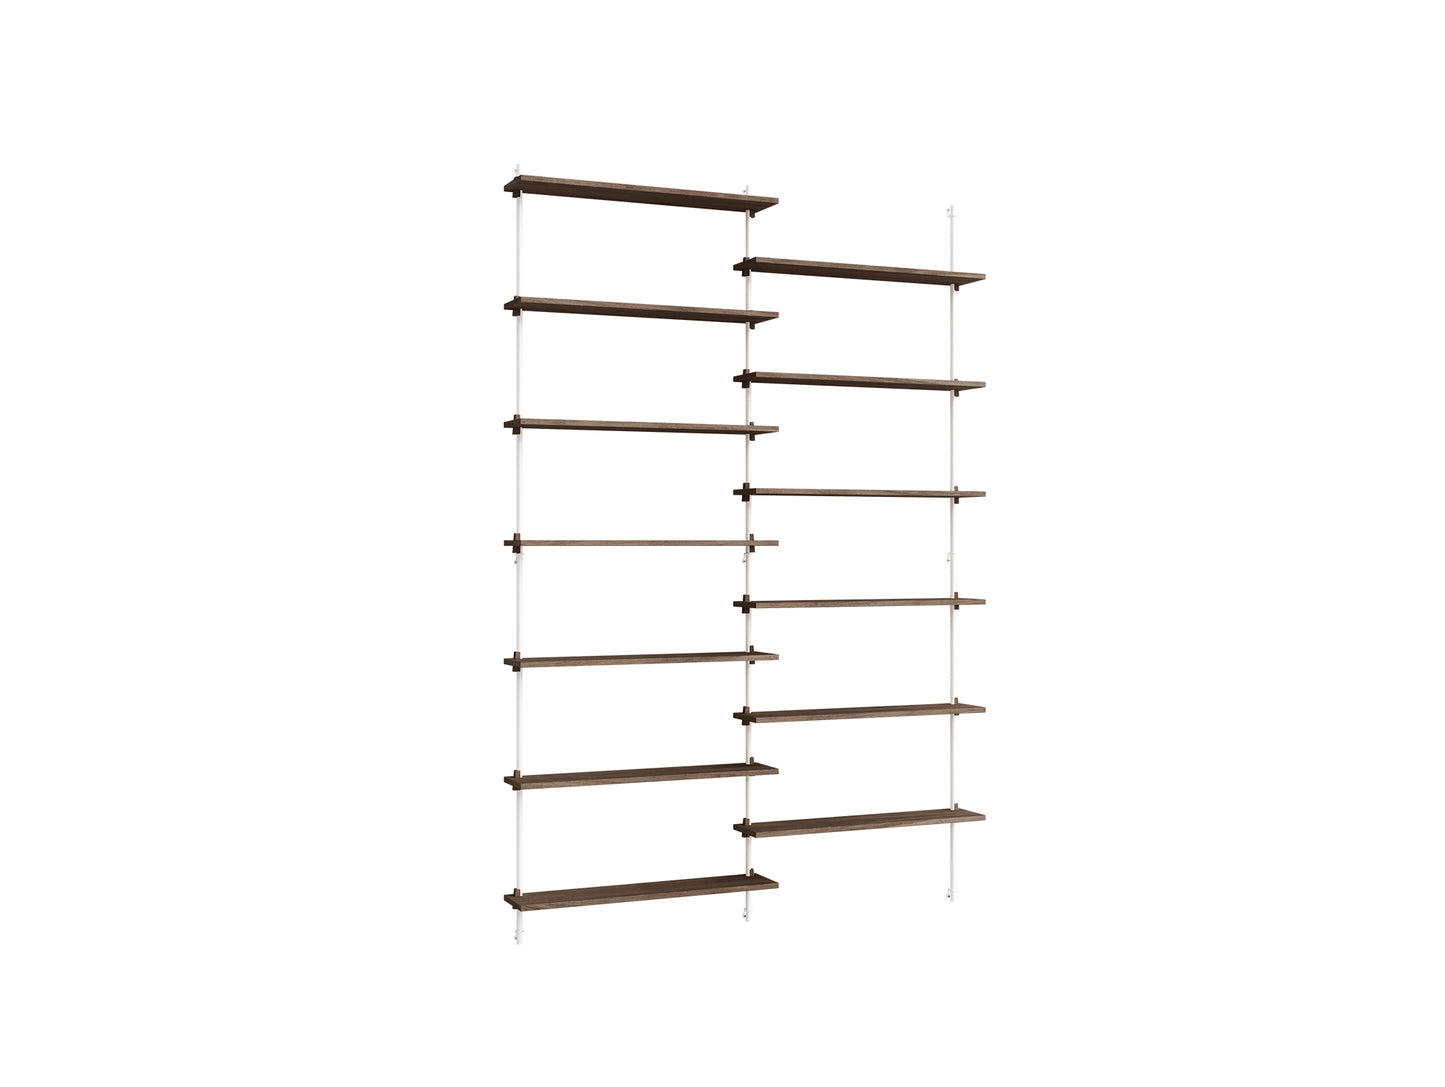 Wall Shelving System Sets (230 cm) by Moebe - WS.230.2 / White Uprights / Smoked Oak